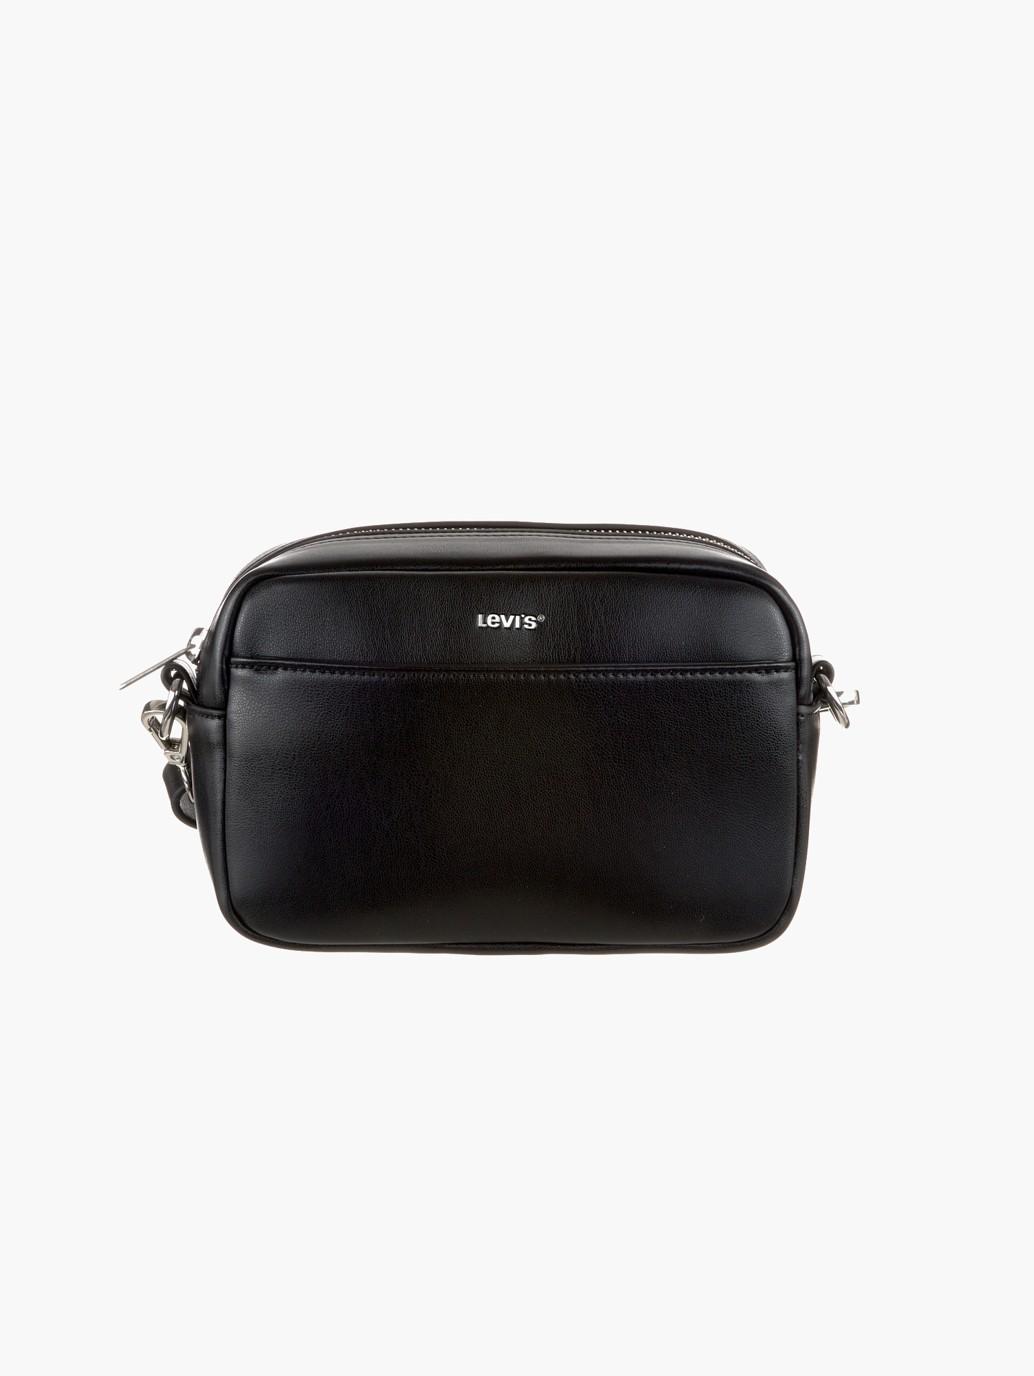 Buy Levi's® Women's Sally Camera Bag| Levi's Official Online Store SG